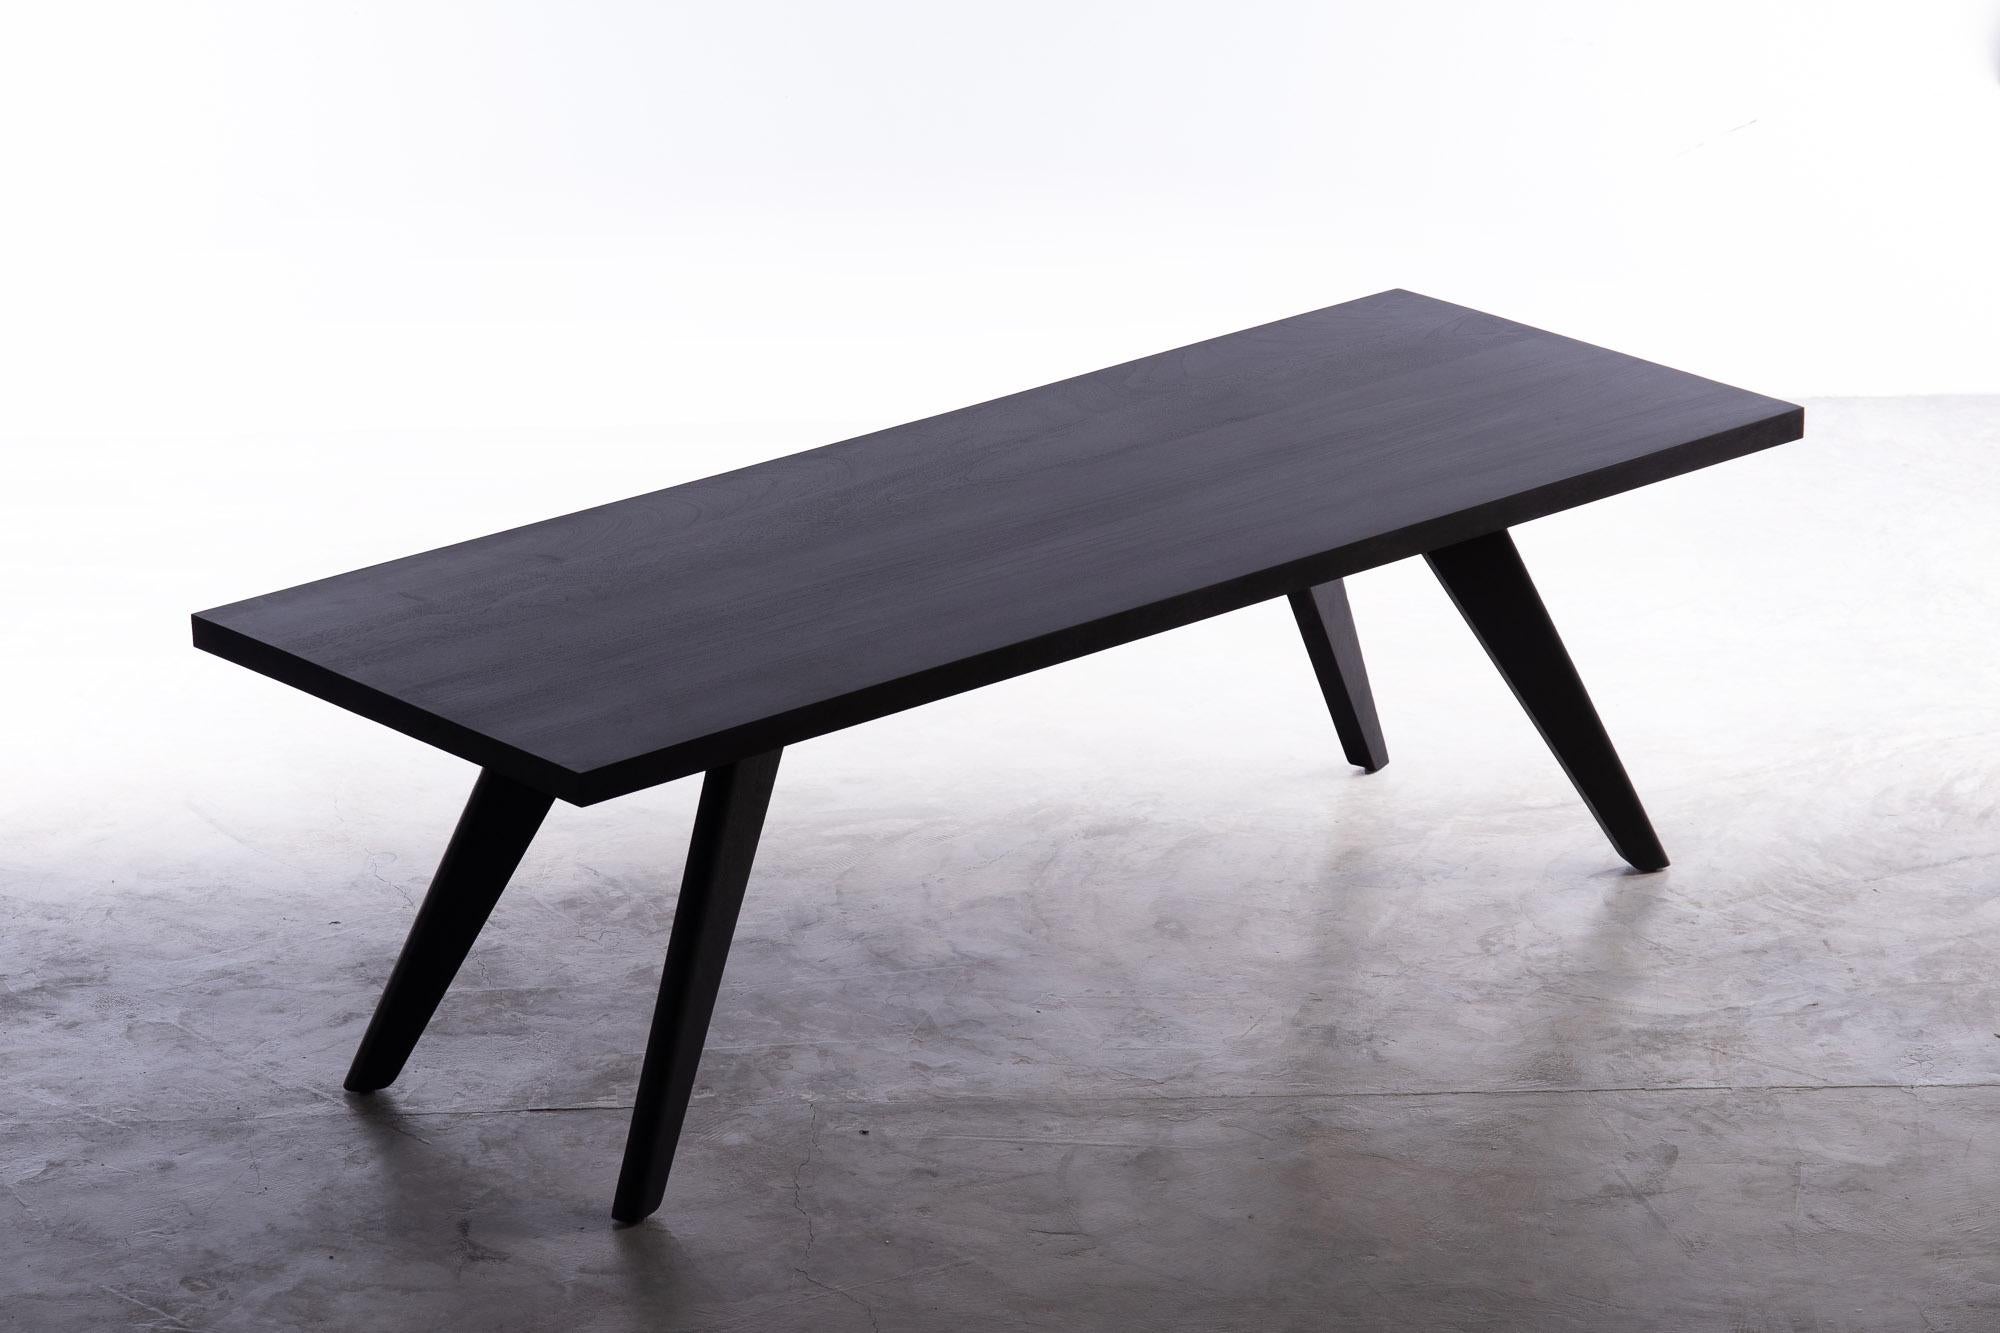 Hand-Crafted Kena Table 200cm, Charcoal Black Acacia Wood For Sale